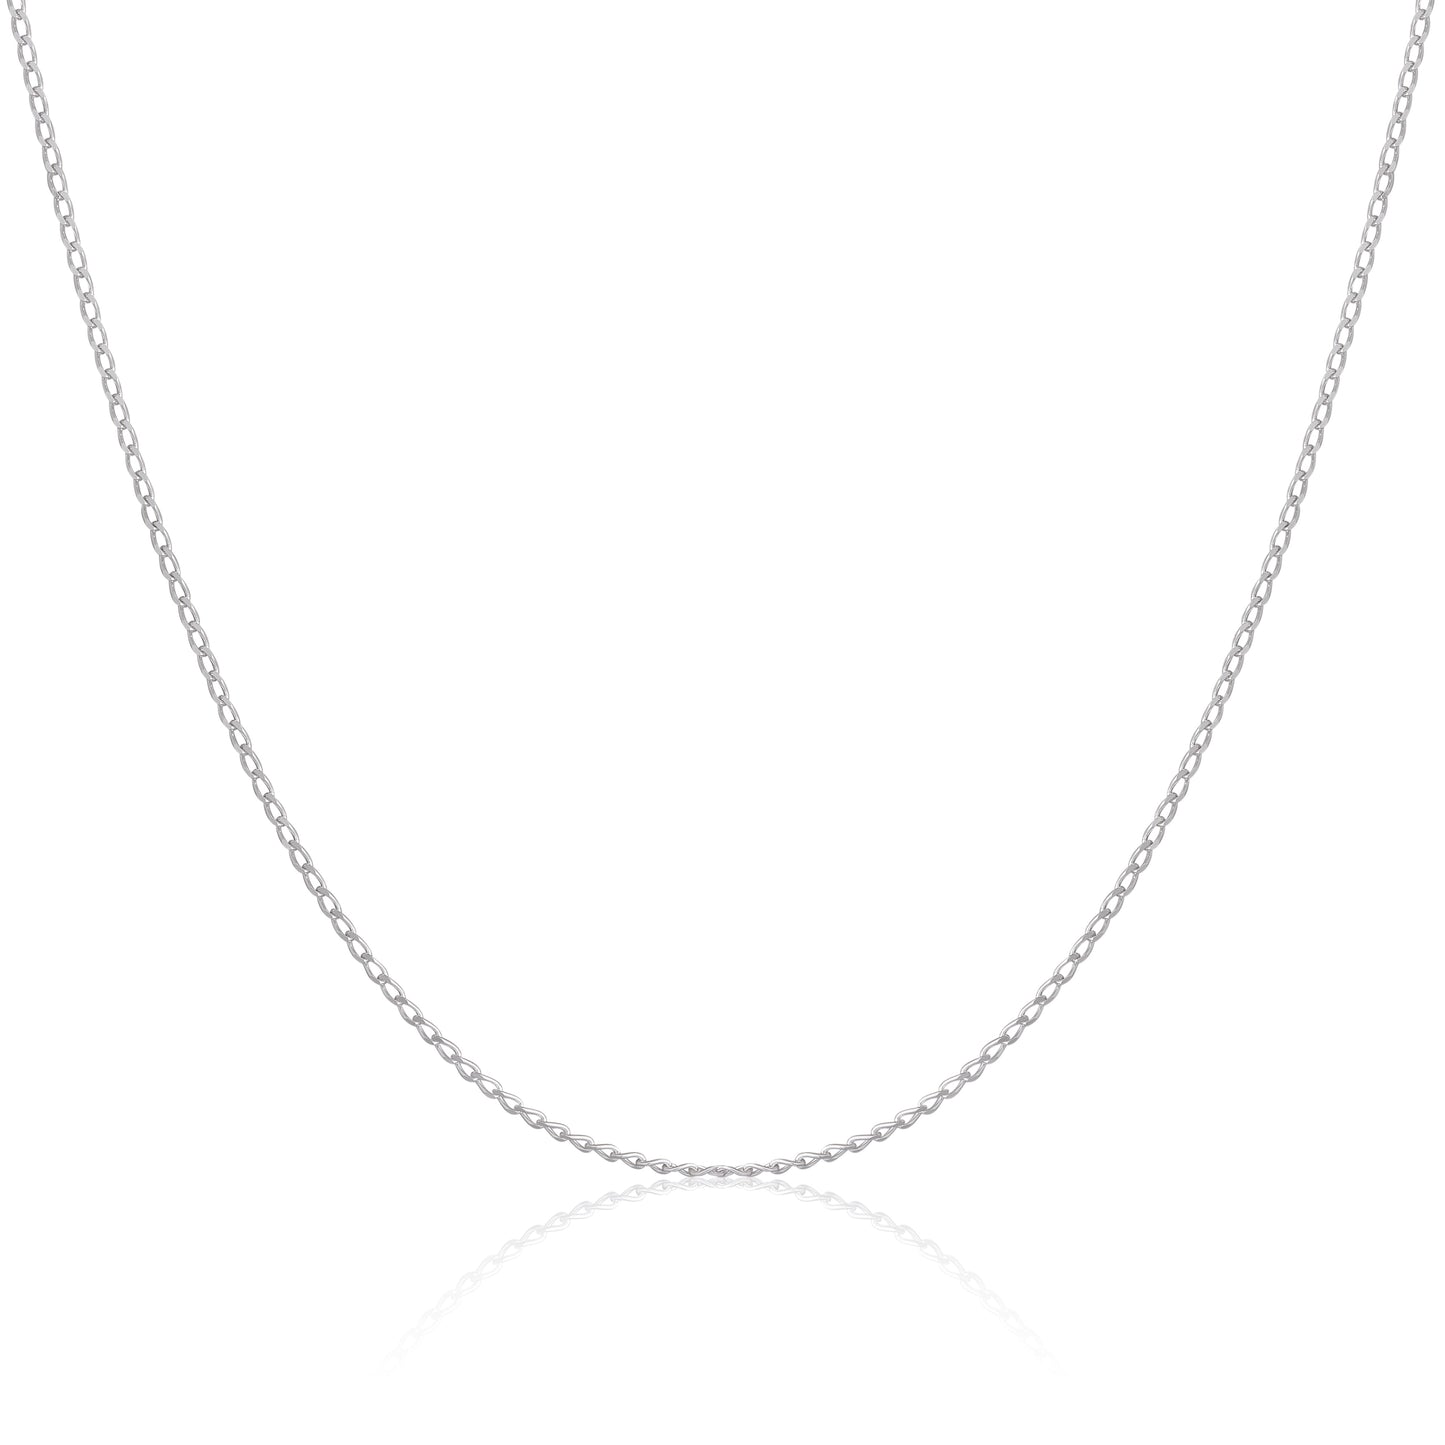 Sterling Silver 1mm Long Curb Chain 16 - 24 Inches